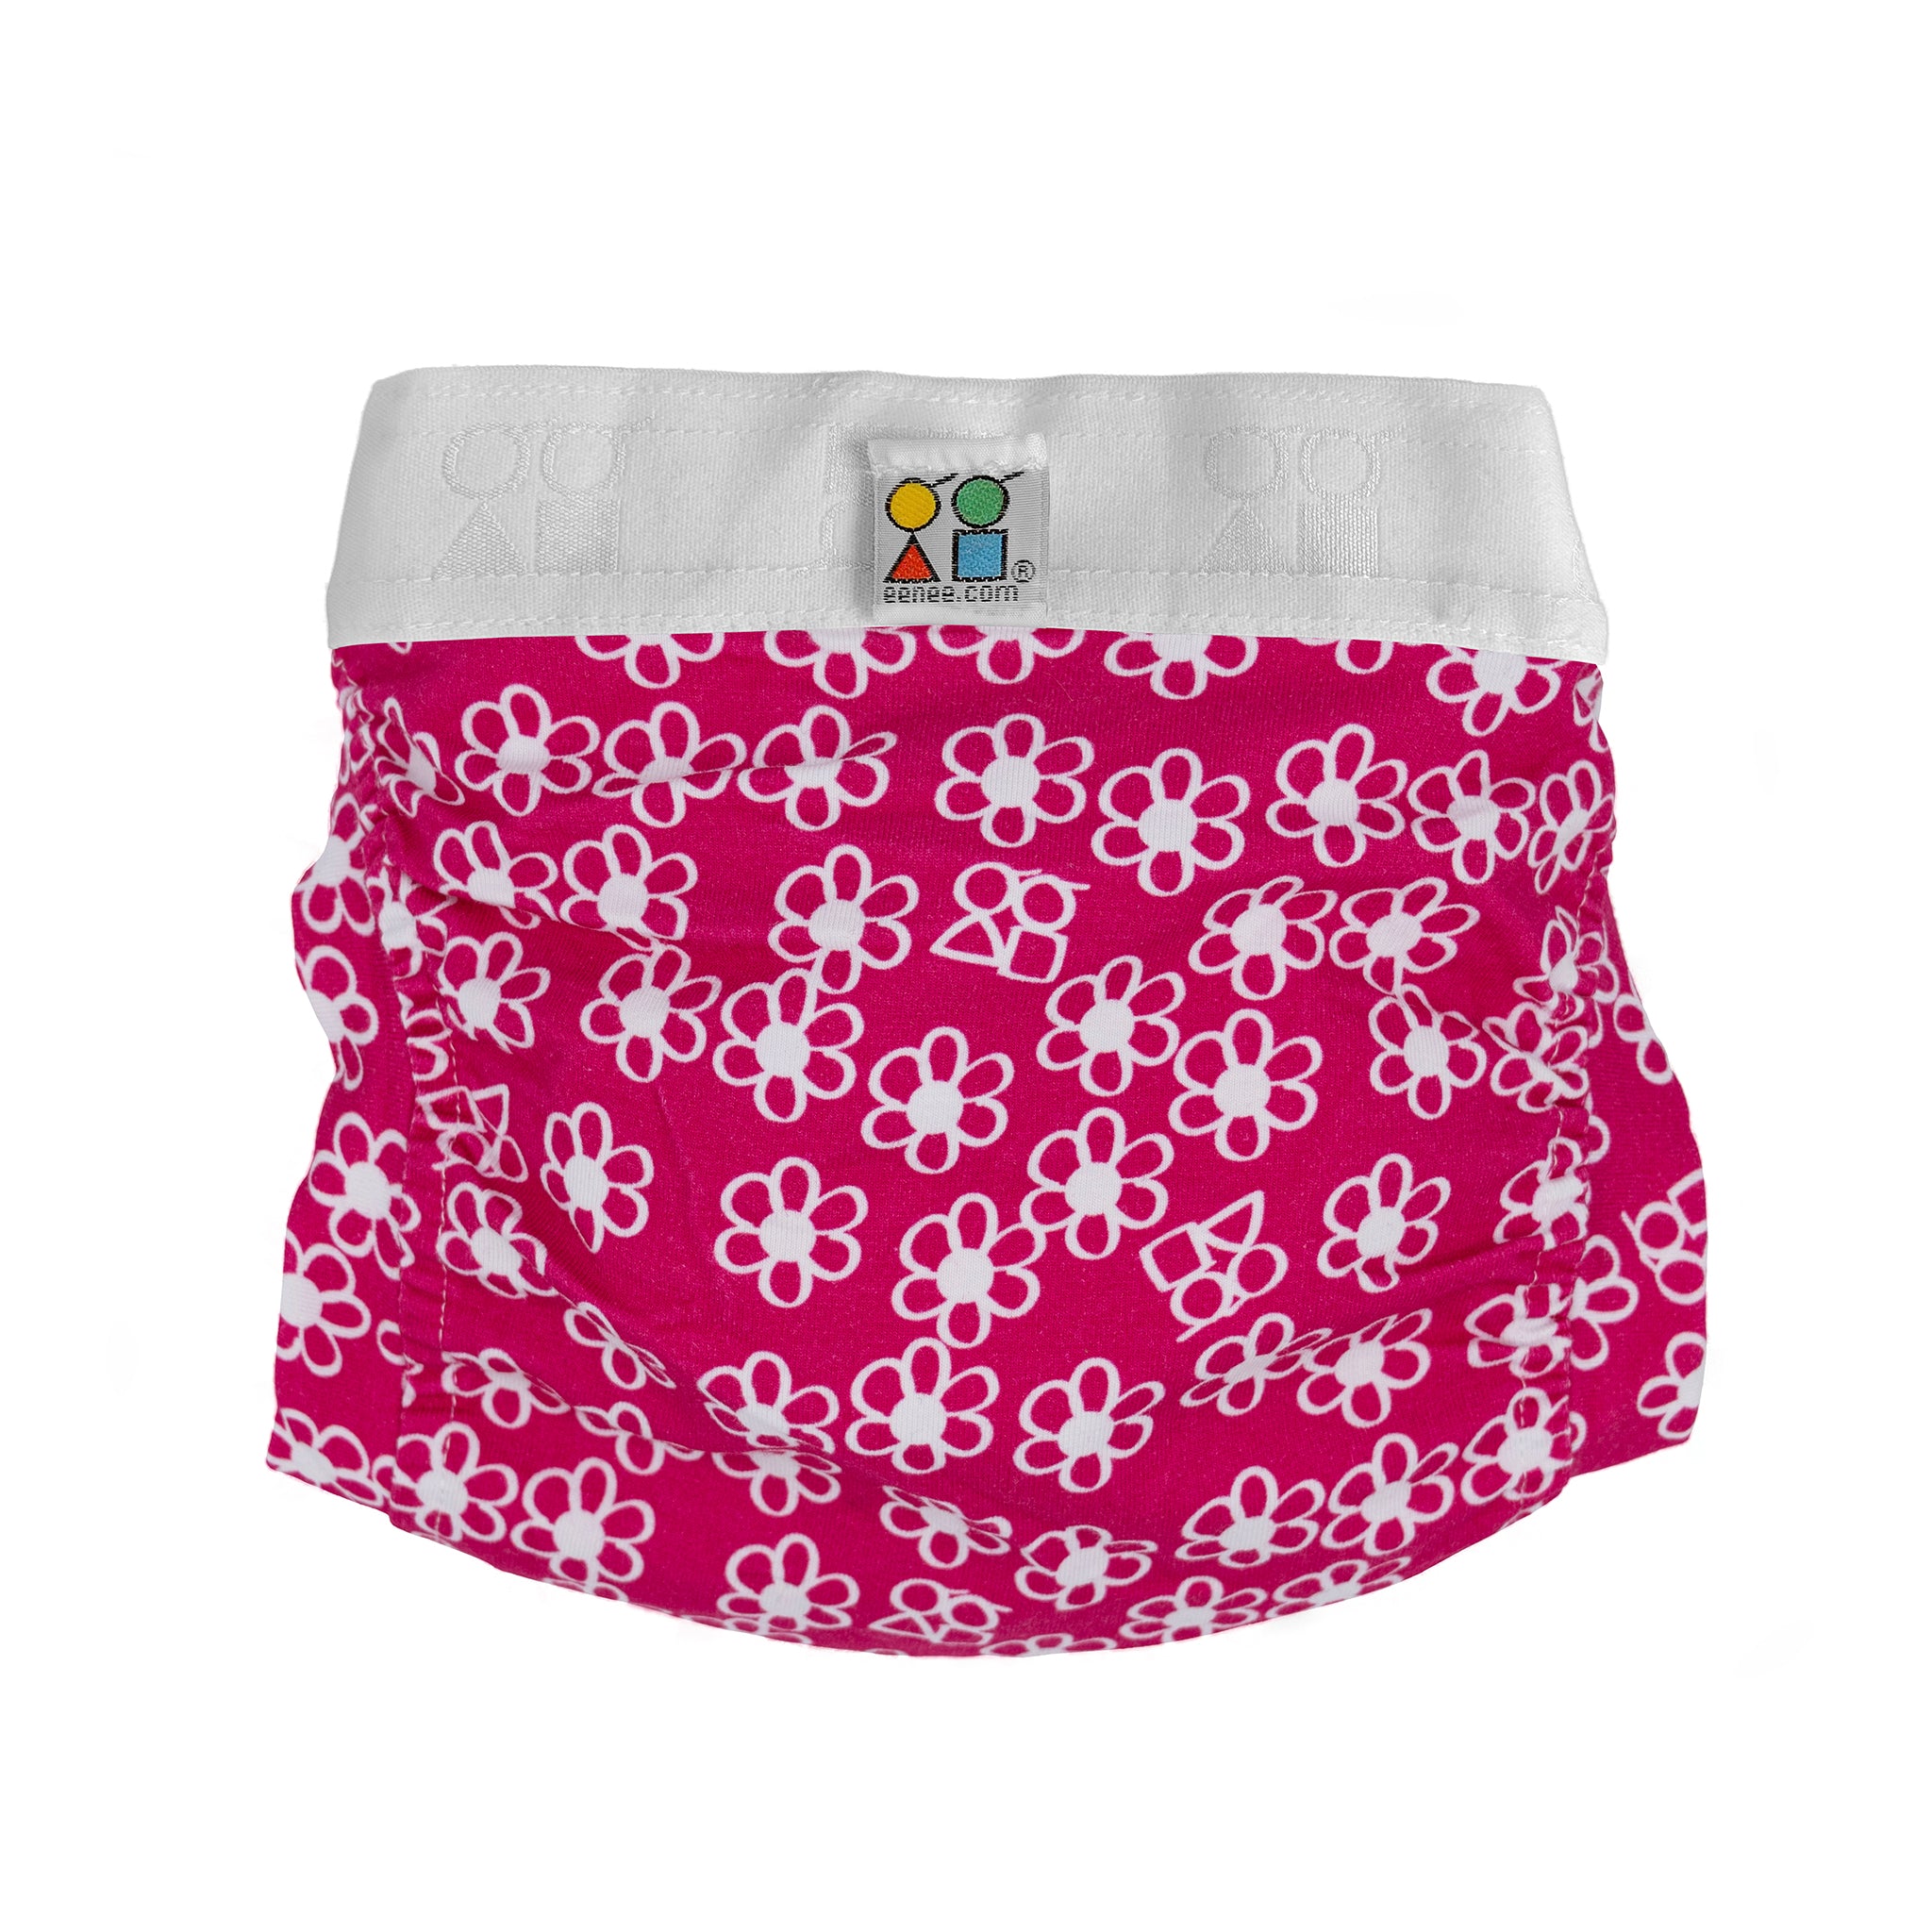 Hybrid nappy pants pink with white flowers